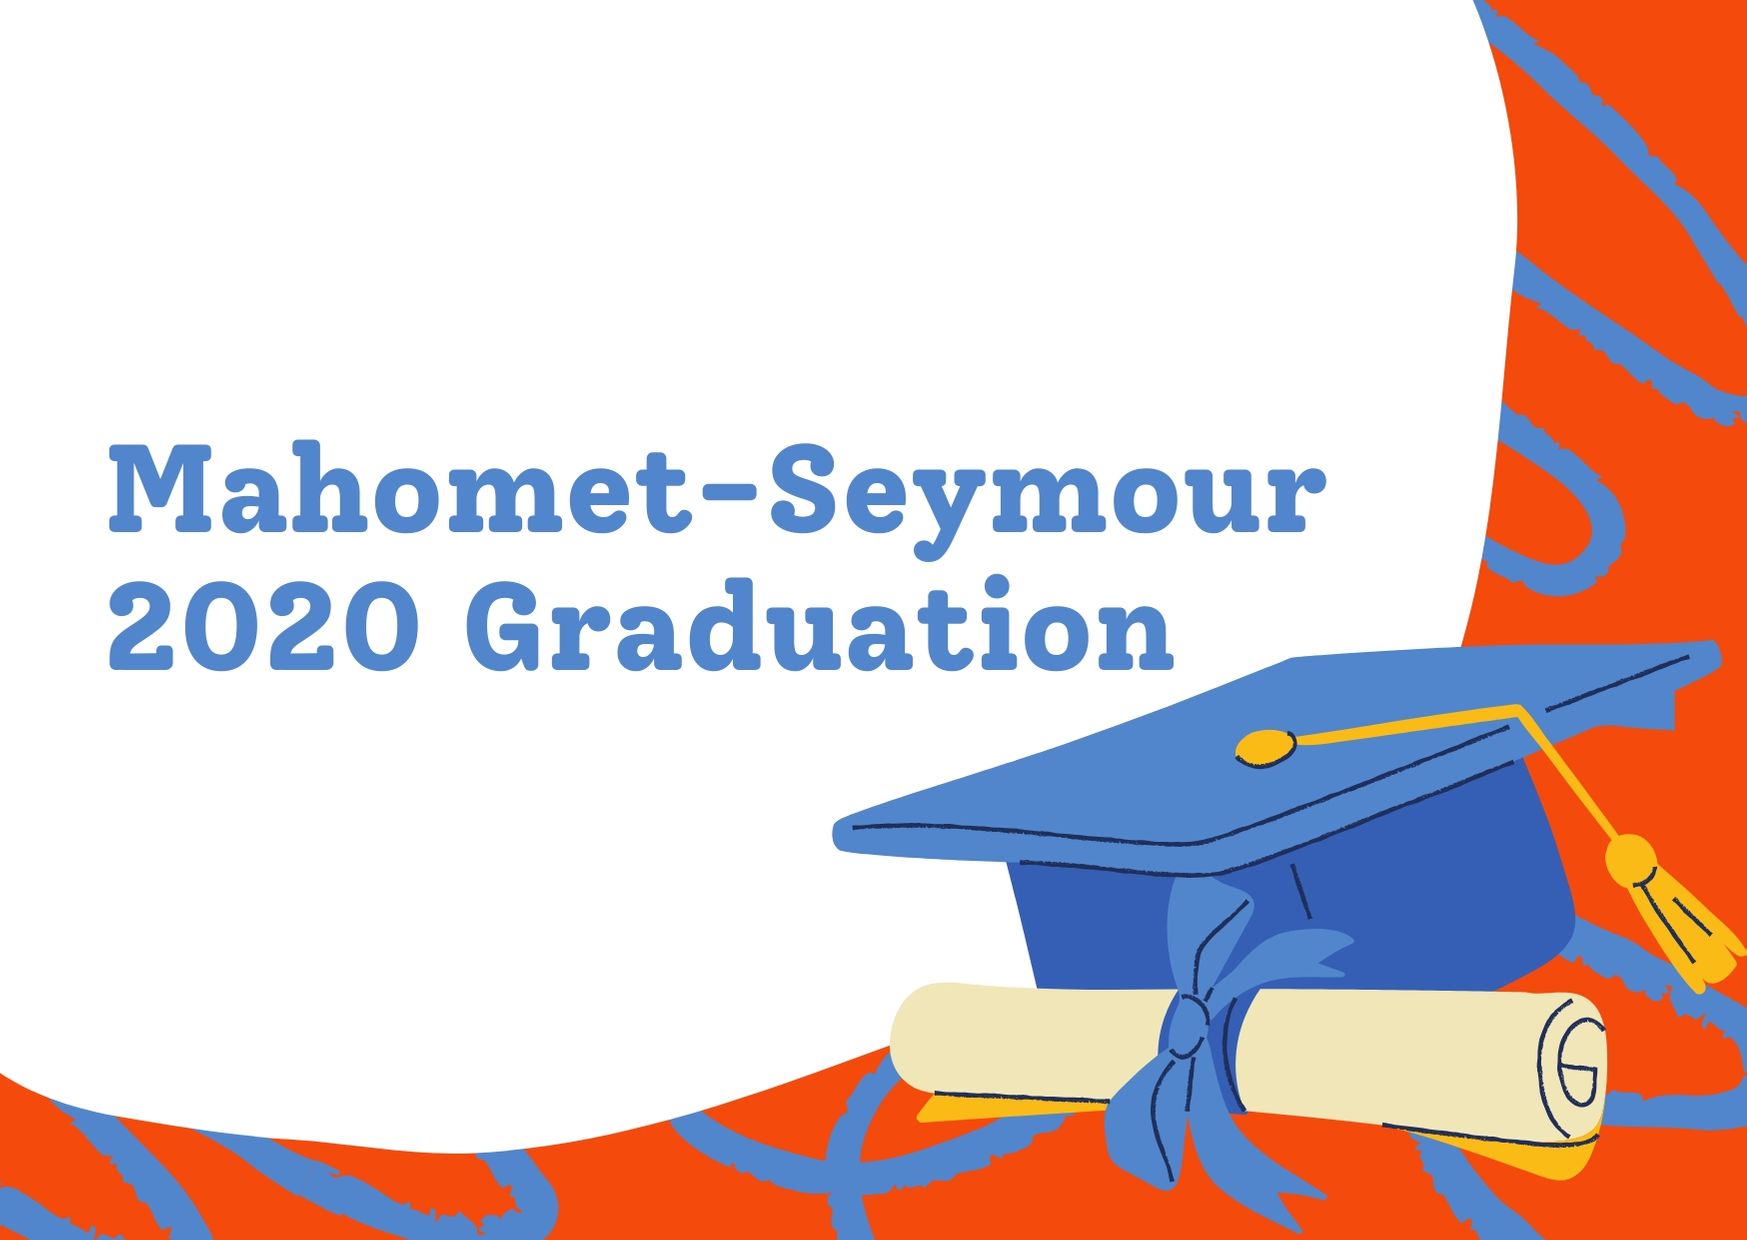 MahometSeymour changes graduation to May 16, video released on May 22